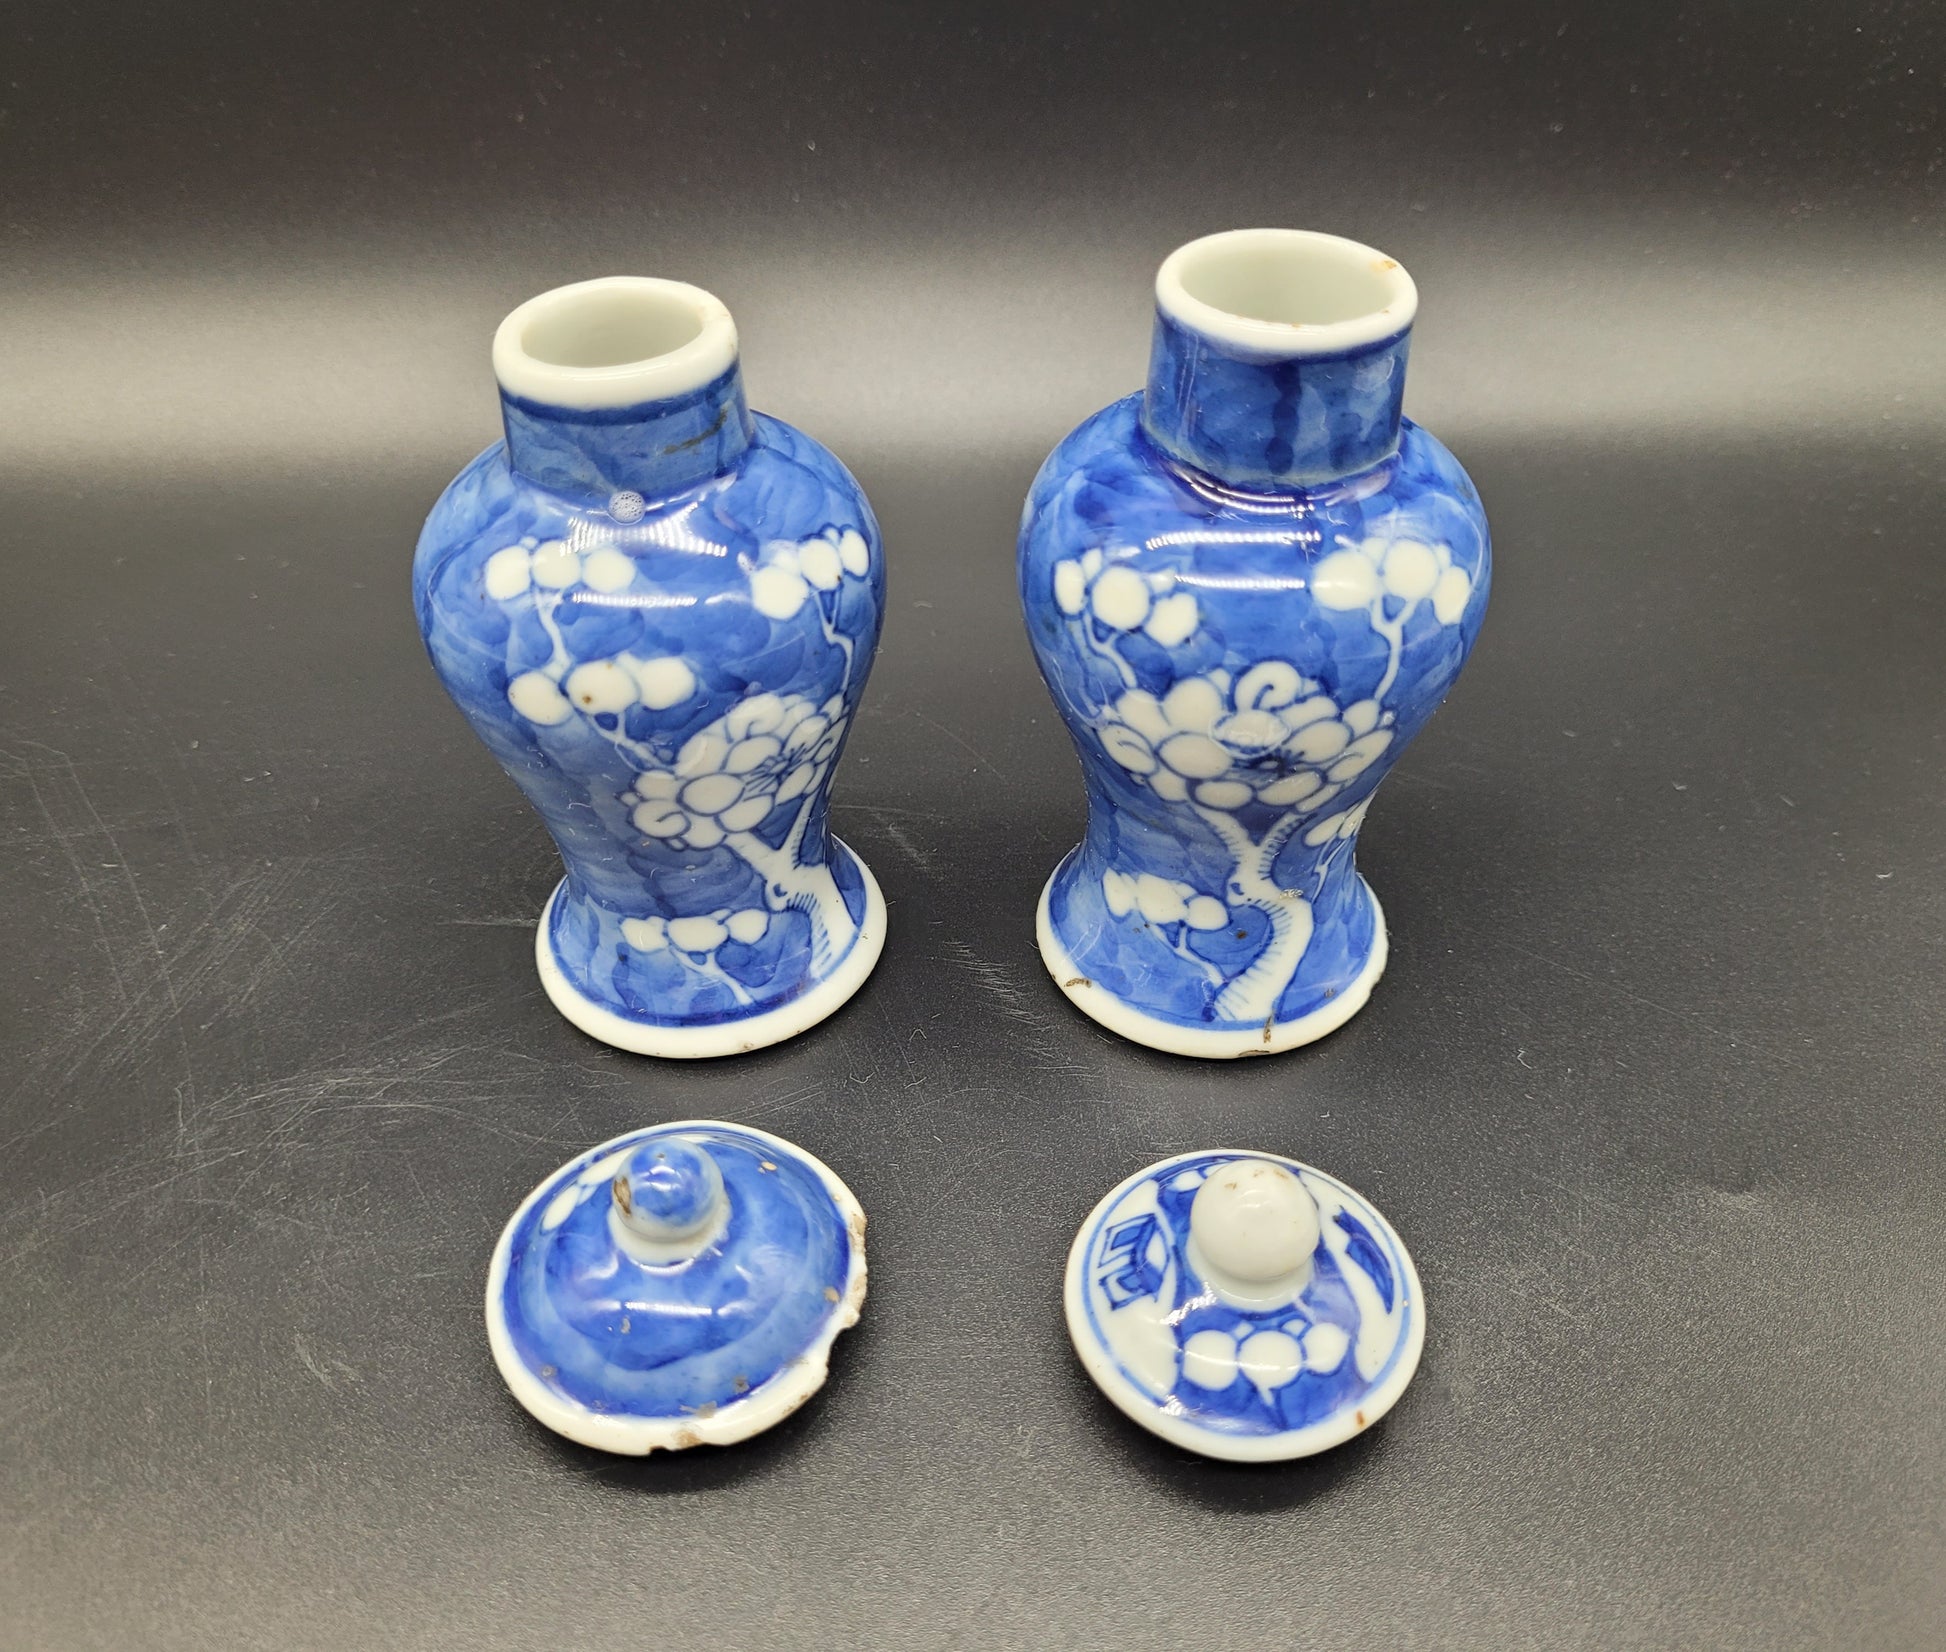 Buy Antiques Online Chinese 19th Century Prunus Pattern Miniature Vases SIGNED